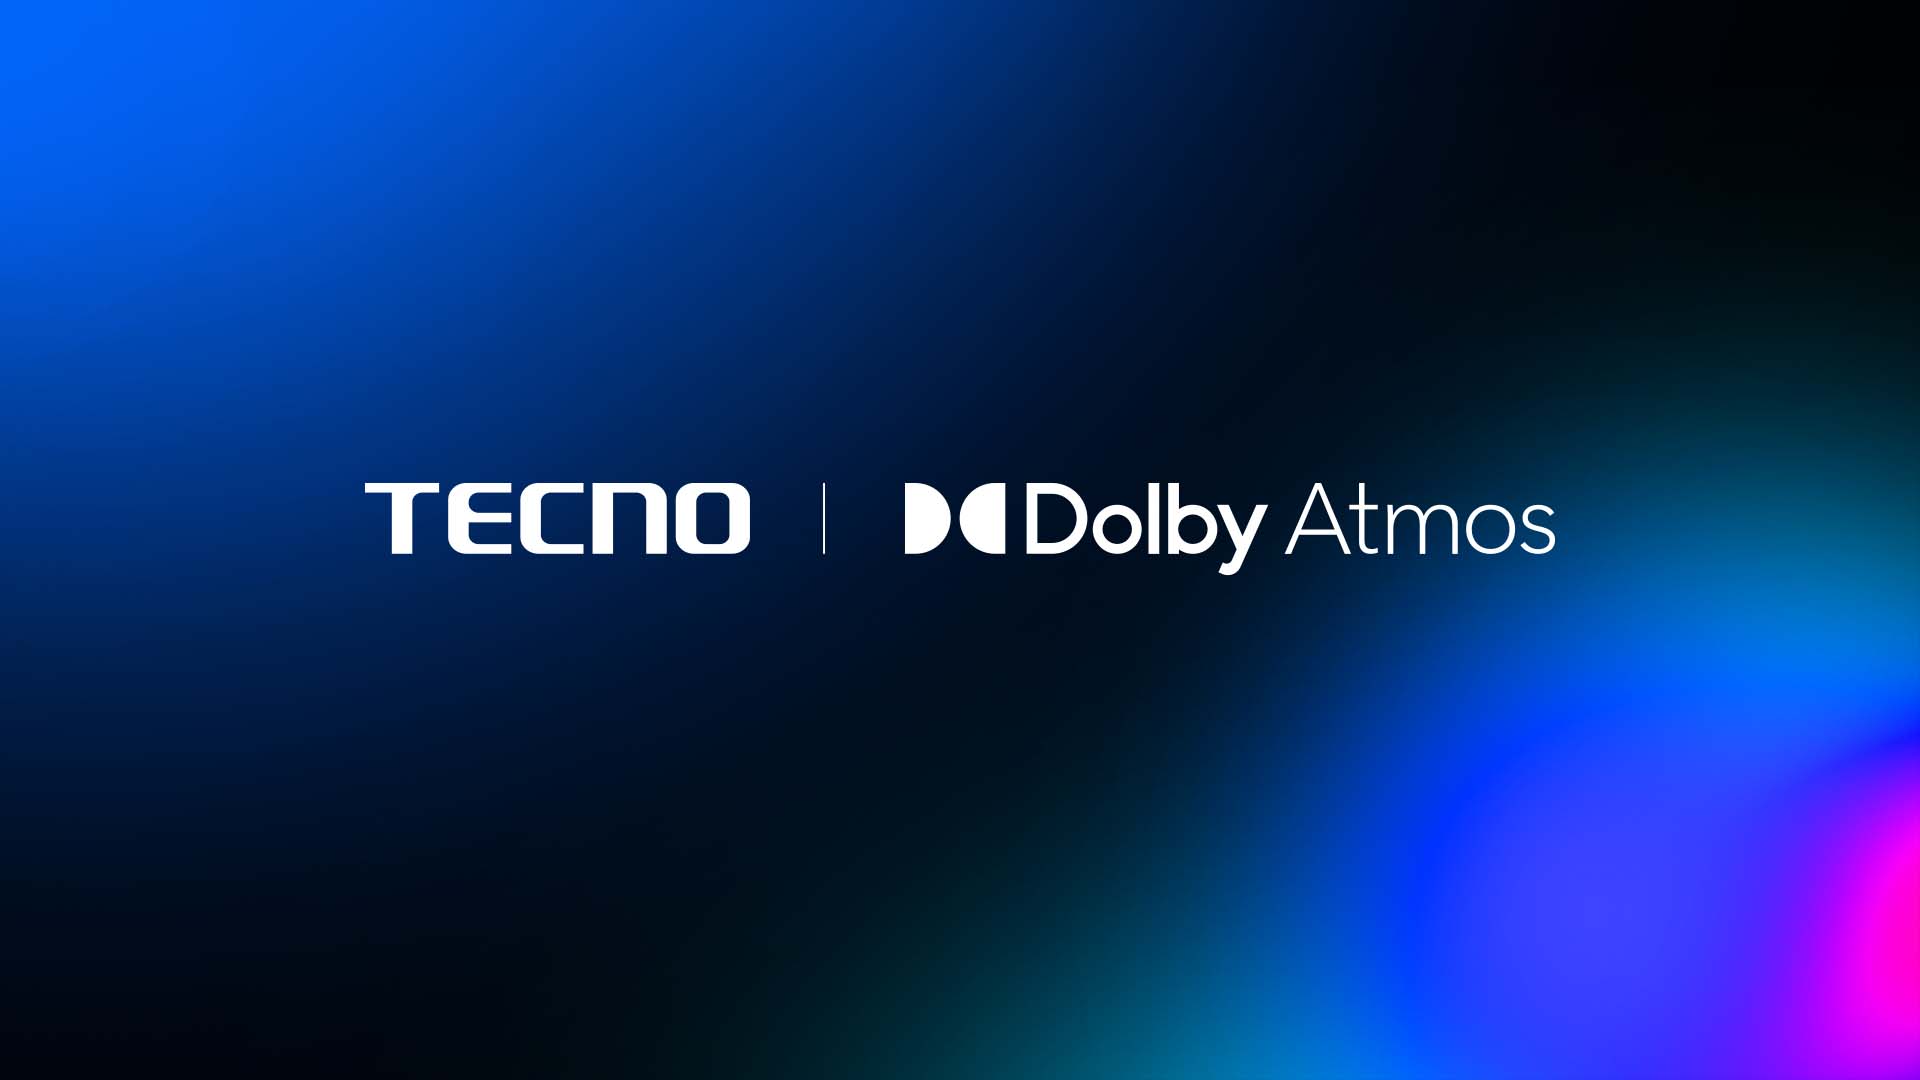 TECNO Partners with Dolby to Bring Next-Level Sound to Phones